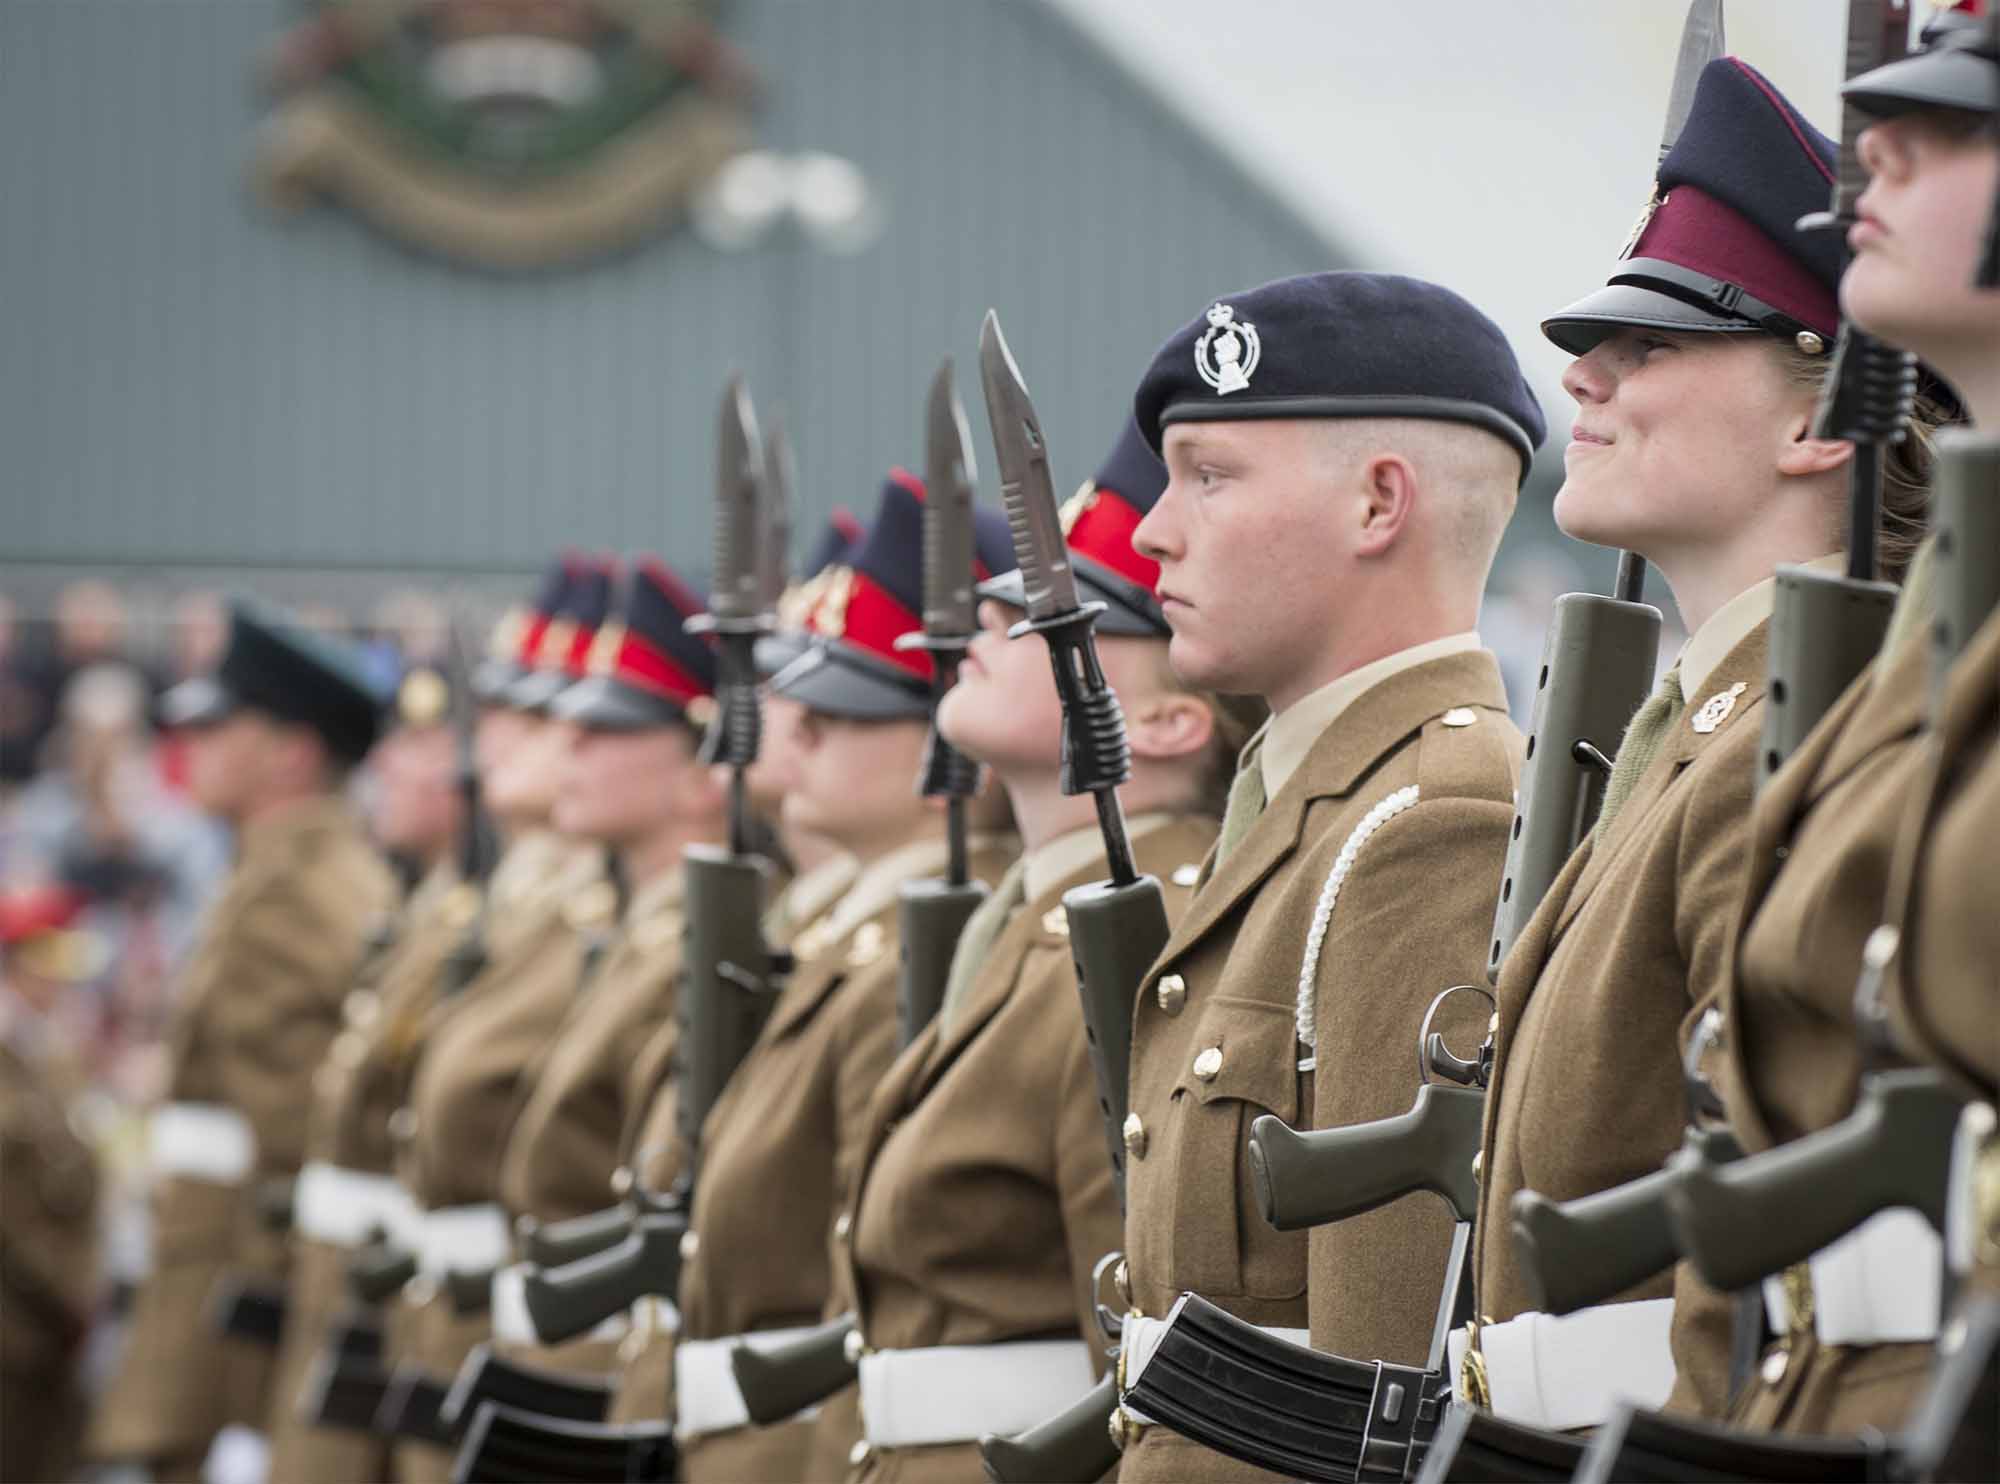 Pictured:A Junior Soldier from the Royal Armoured Corp (RAC) alongside some of the other 11 cab badges on parade at AFC Harrogate. More than 600 teenagers from the Army Foundation College marched on their way to a new career when they graduated from the military training establishment in Harrogate, North Yorkshire. The college in Penny Pot Lane, Harrogate runs two types of course – a 40-week long course and a shorter 20-week course to train 16-17 year olds for a wide variety of Army careers. NOTE TO DESKS:  MoD release authorised handout images.  All images remain Crown Copyright 2016.  Photo credit to read -Sgt Jamie Peters RLC (Phot) Email: jamiepeters@mediaops.army.mod.uk richardwatt@mediaops.army.mod.uk shanewilkinson@mediaops.army.mod.uk Richard Watt - 07836 515306 Shane Wilkinson - 07901 590723